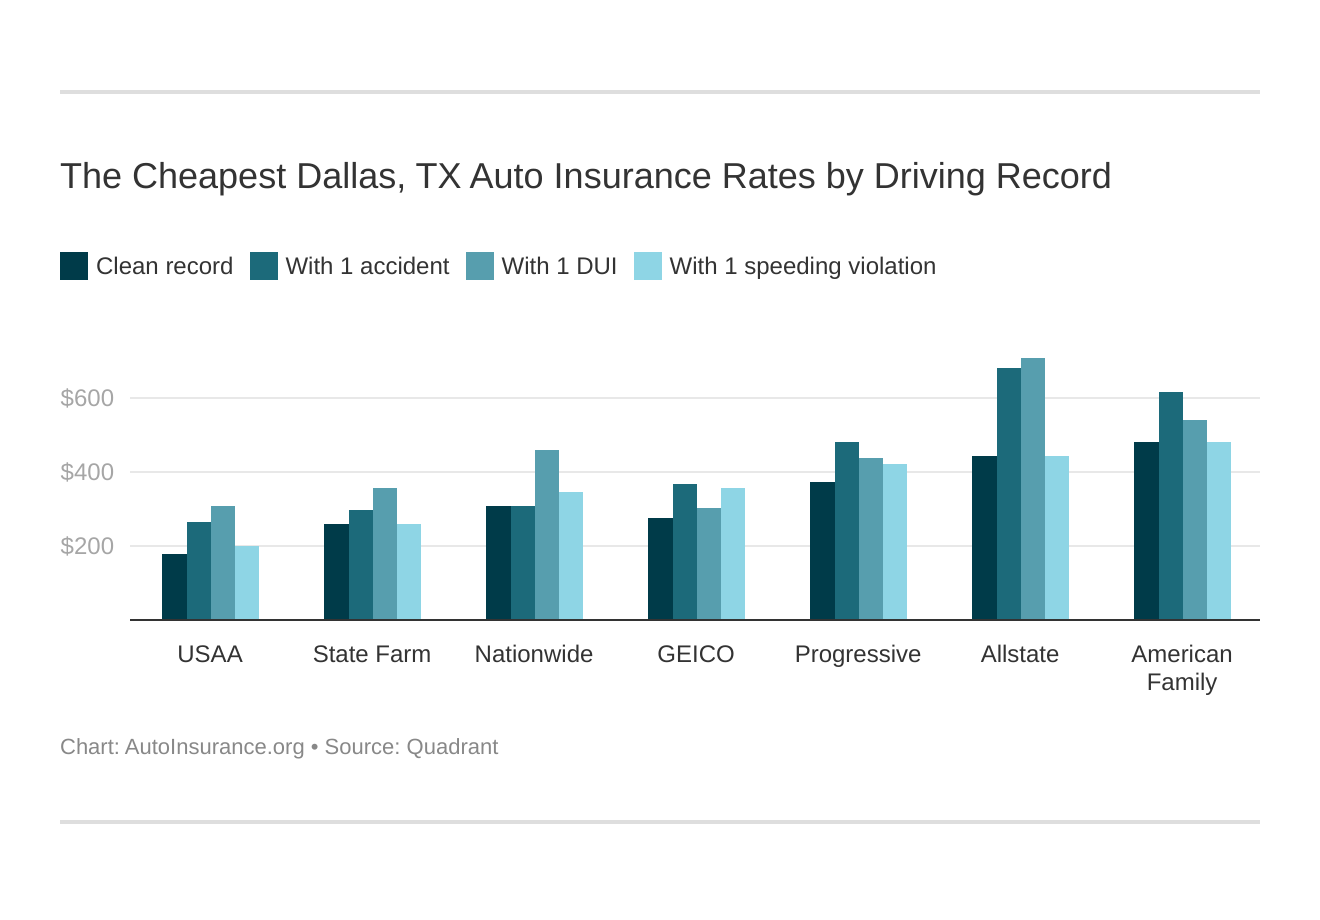 The Cheapest Dallas, TX Auto Insurance Rates by Driving Record